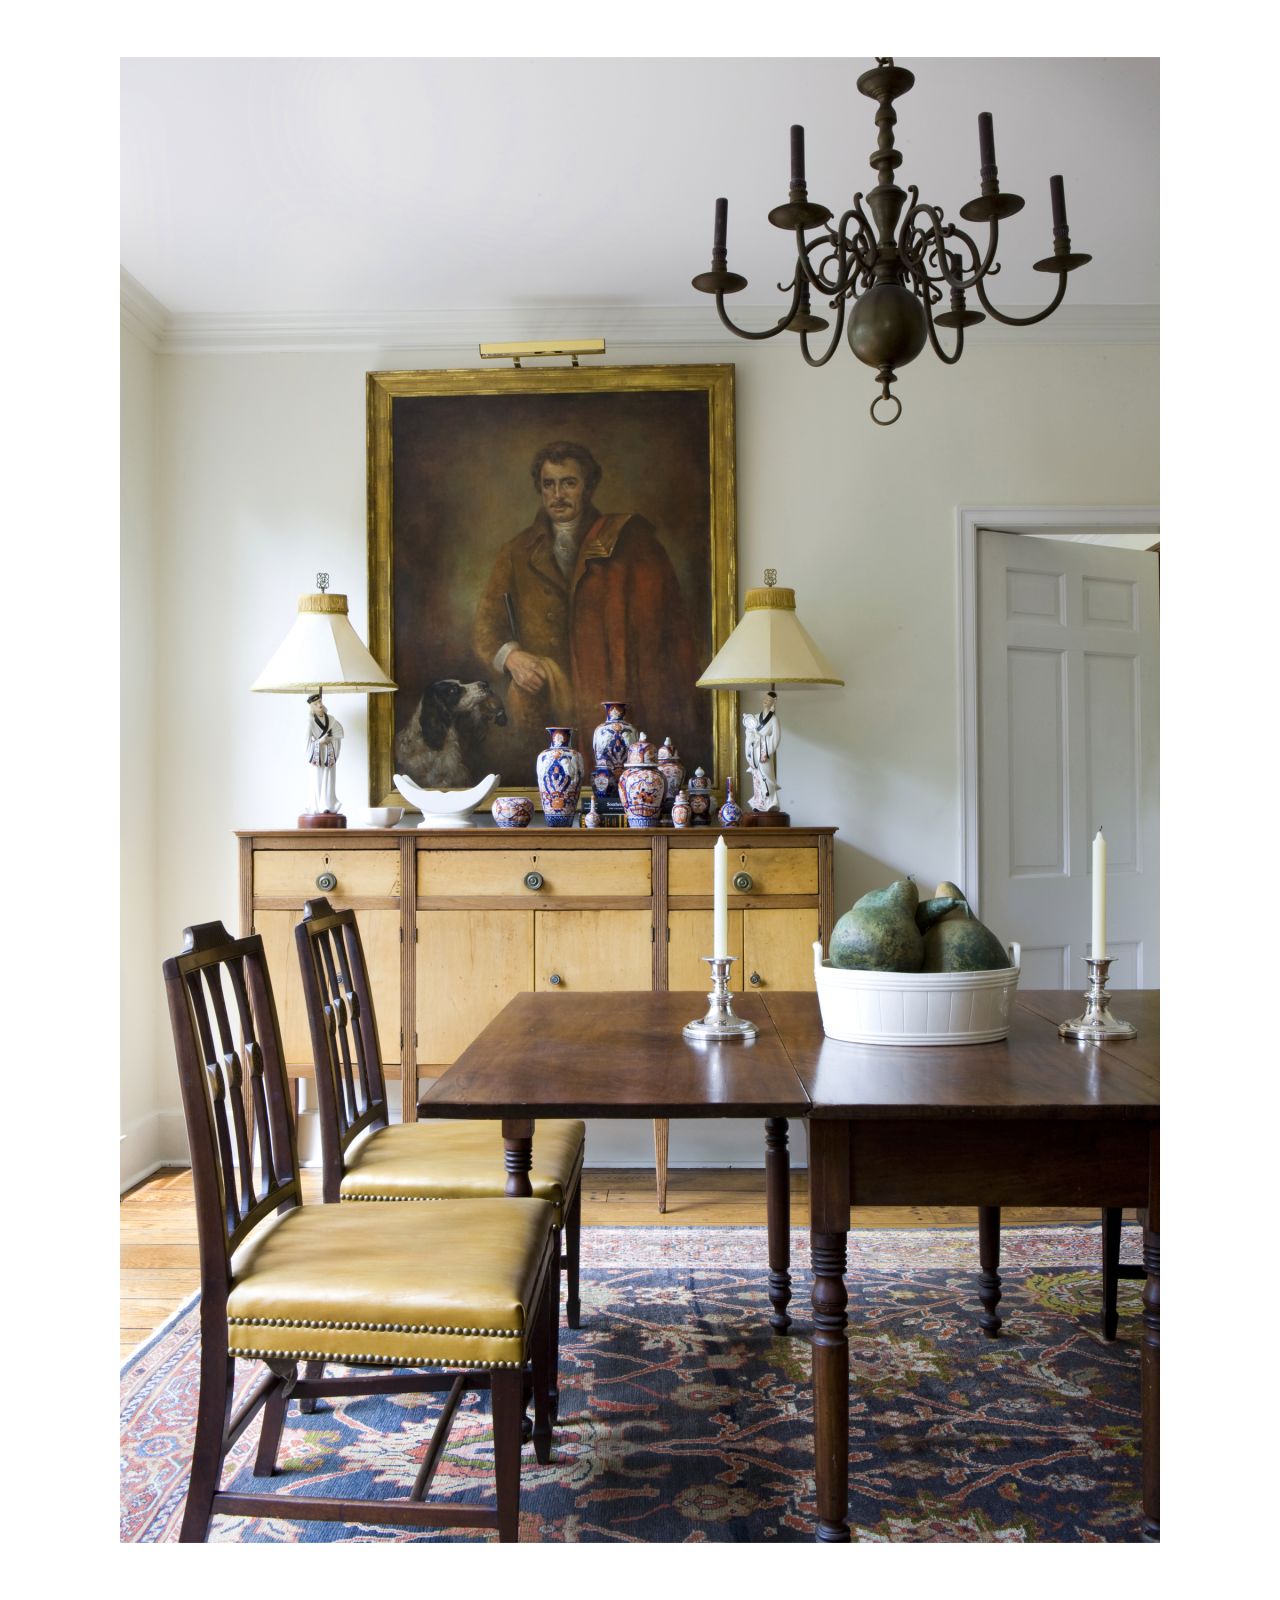 Trey LaFave's Atlanta dining room offers guests collections and elegant antiques to look at and enjoy during long dinners.